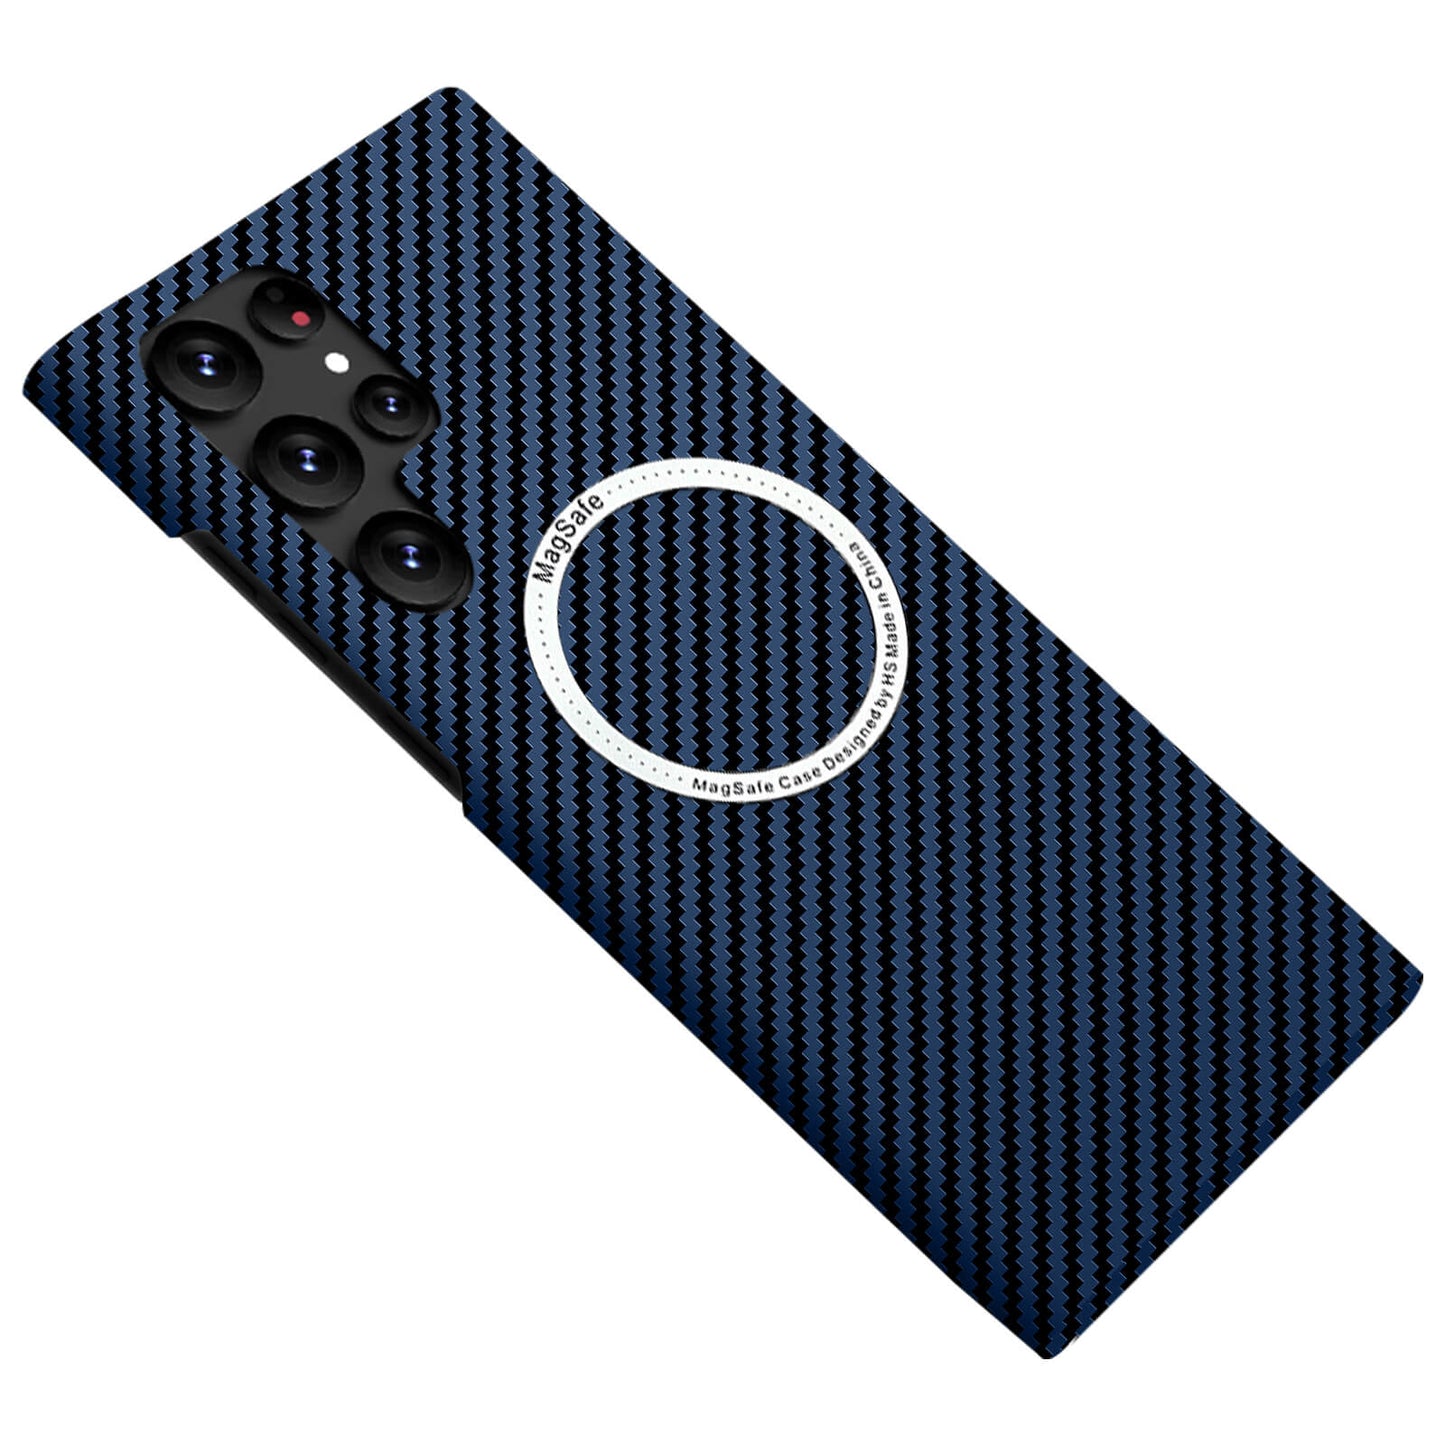 Samsung Galaxy S/A Series | Magnetic Carbon Fiber Phone Case